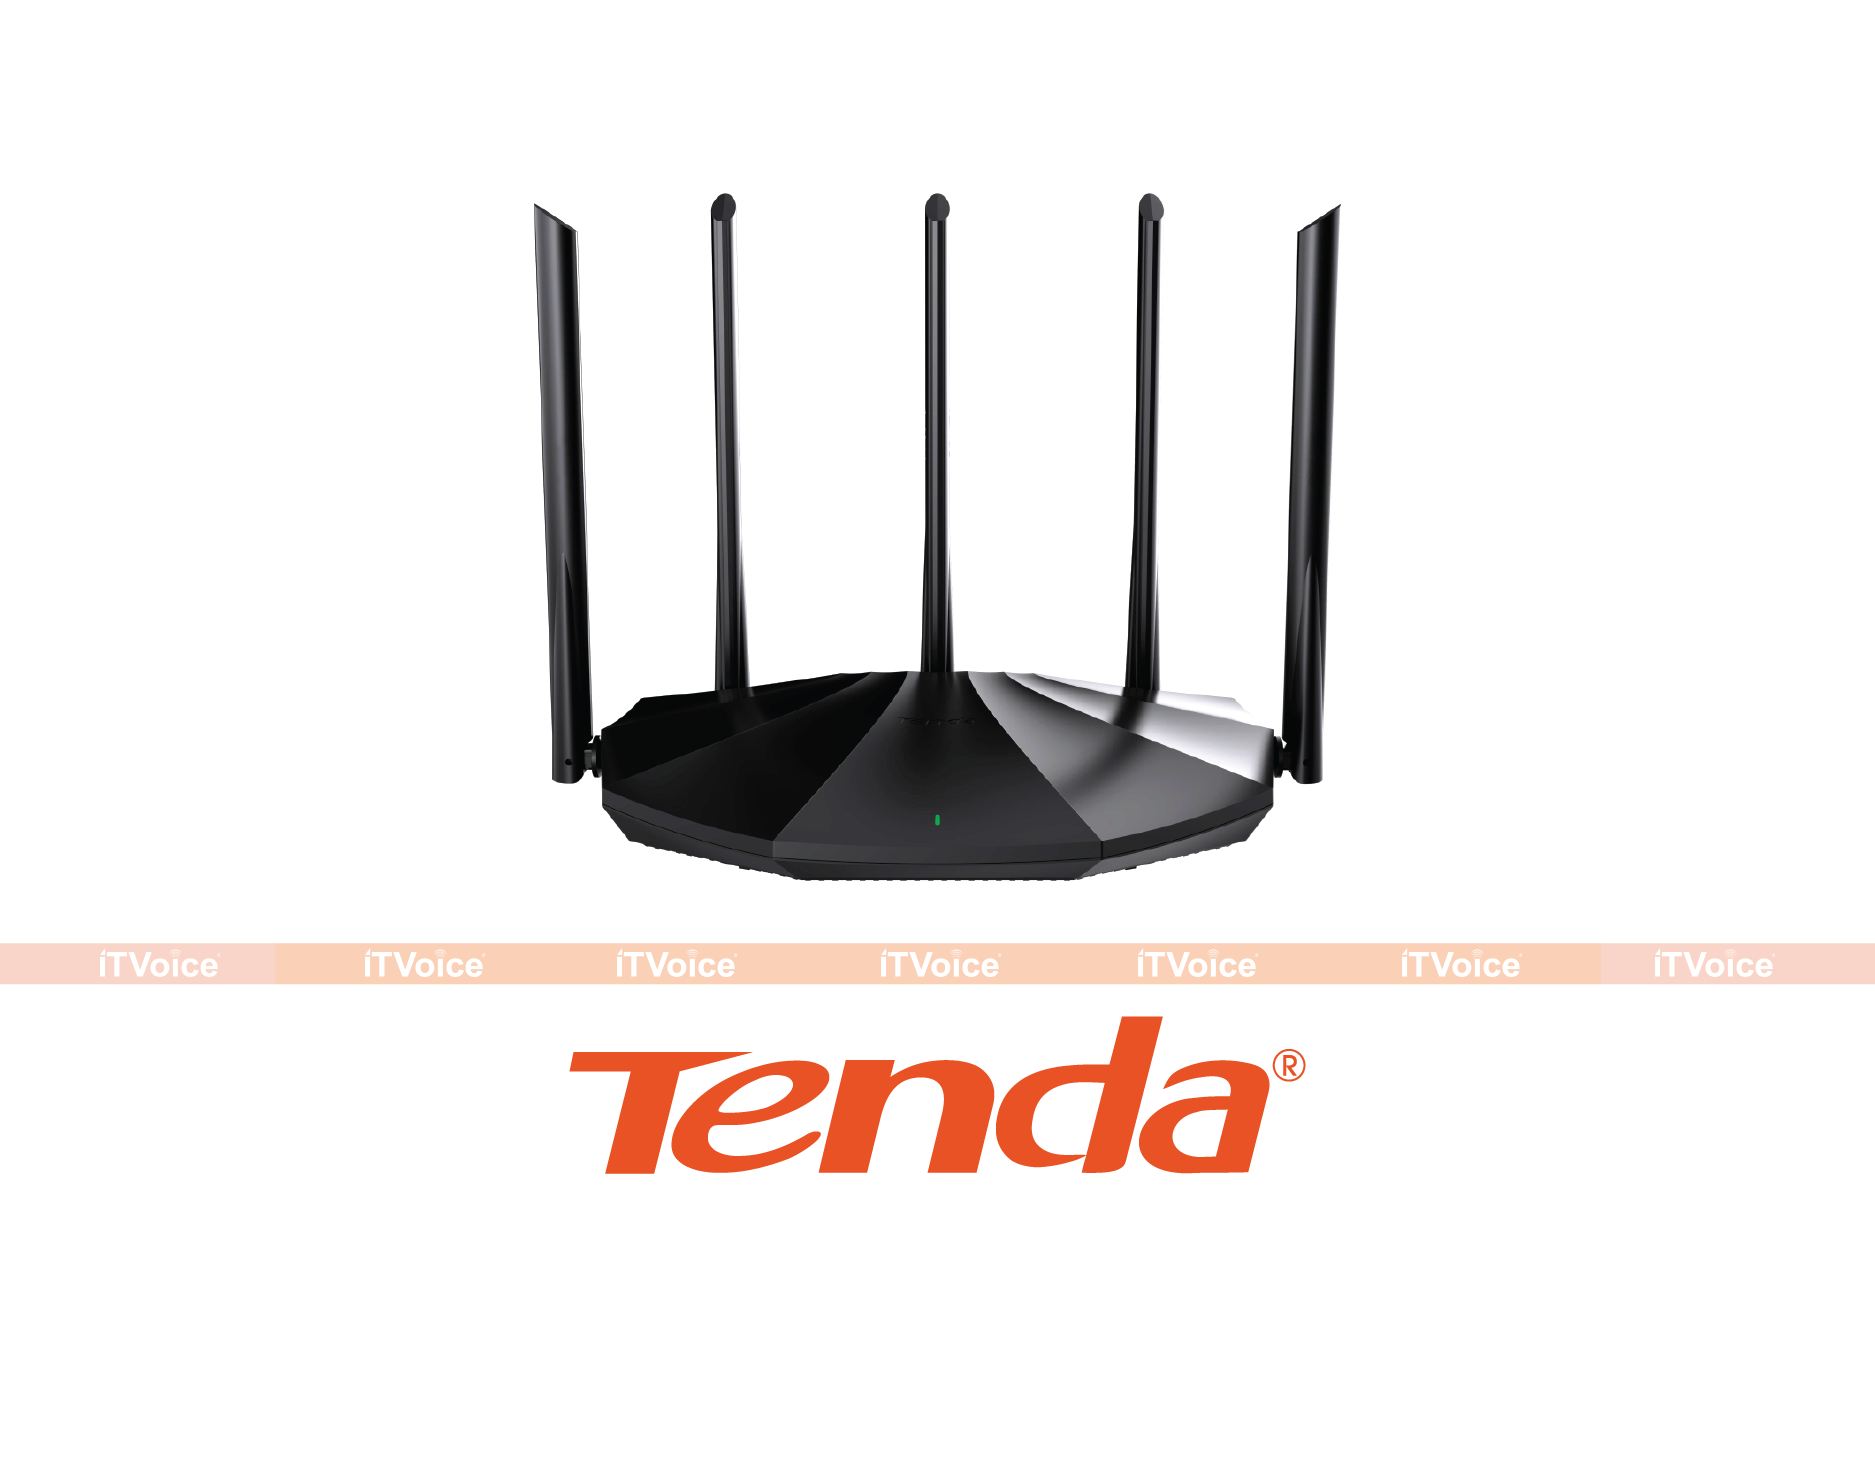 Tenda Announces Wi-Fi 6 Routers ‘RX2 Pro’ & ‘TX2 Pro’ for Home Users